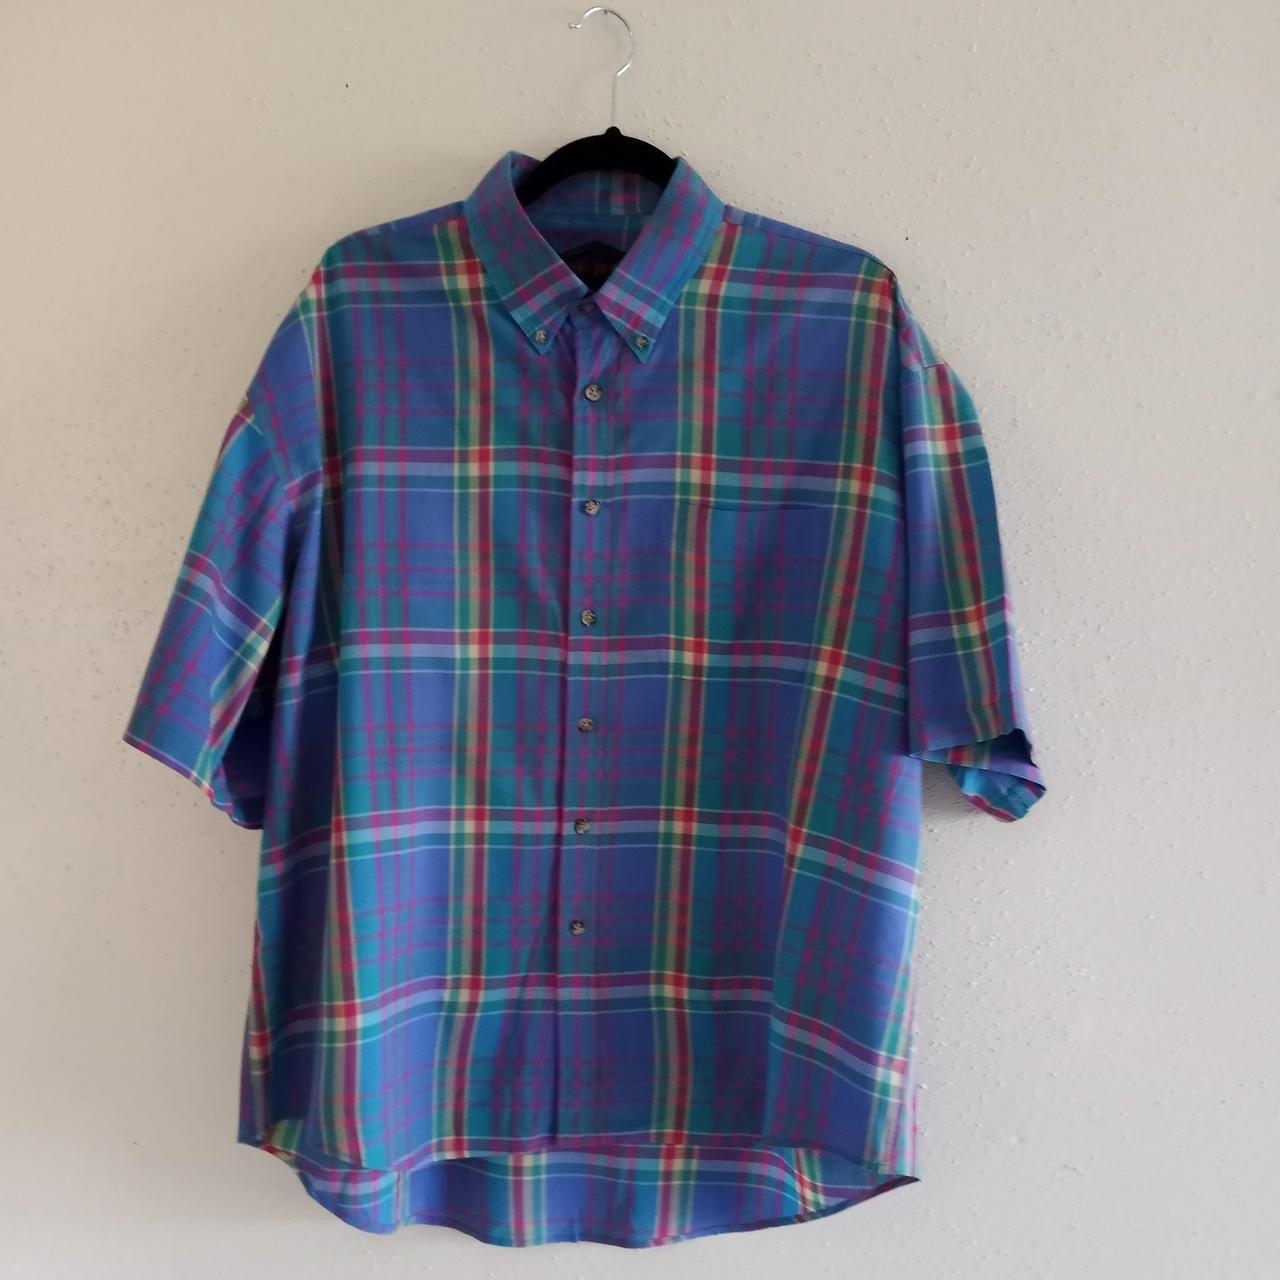 Product Image 1 - Halifax Outfitters Mens Shirt
Excellent condition